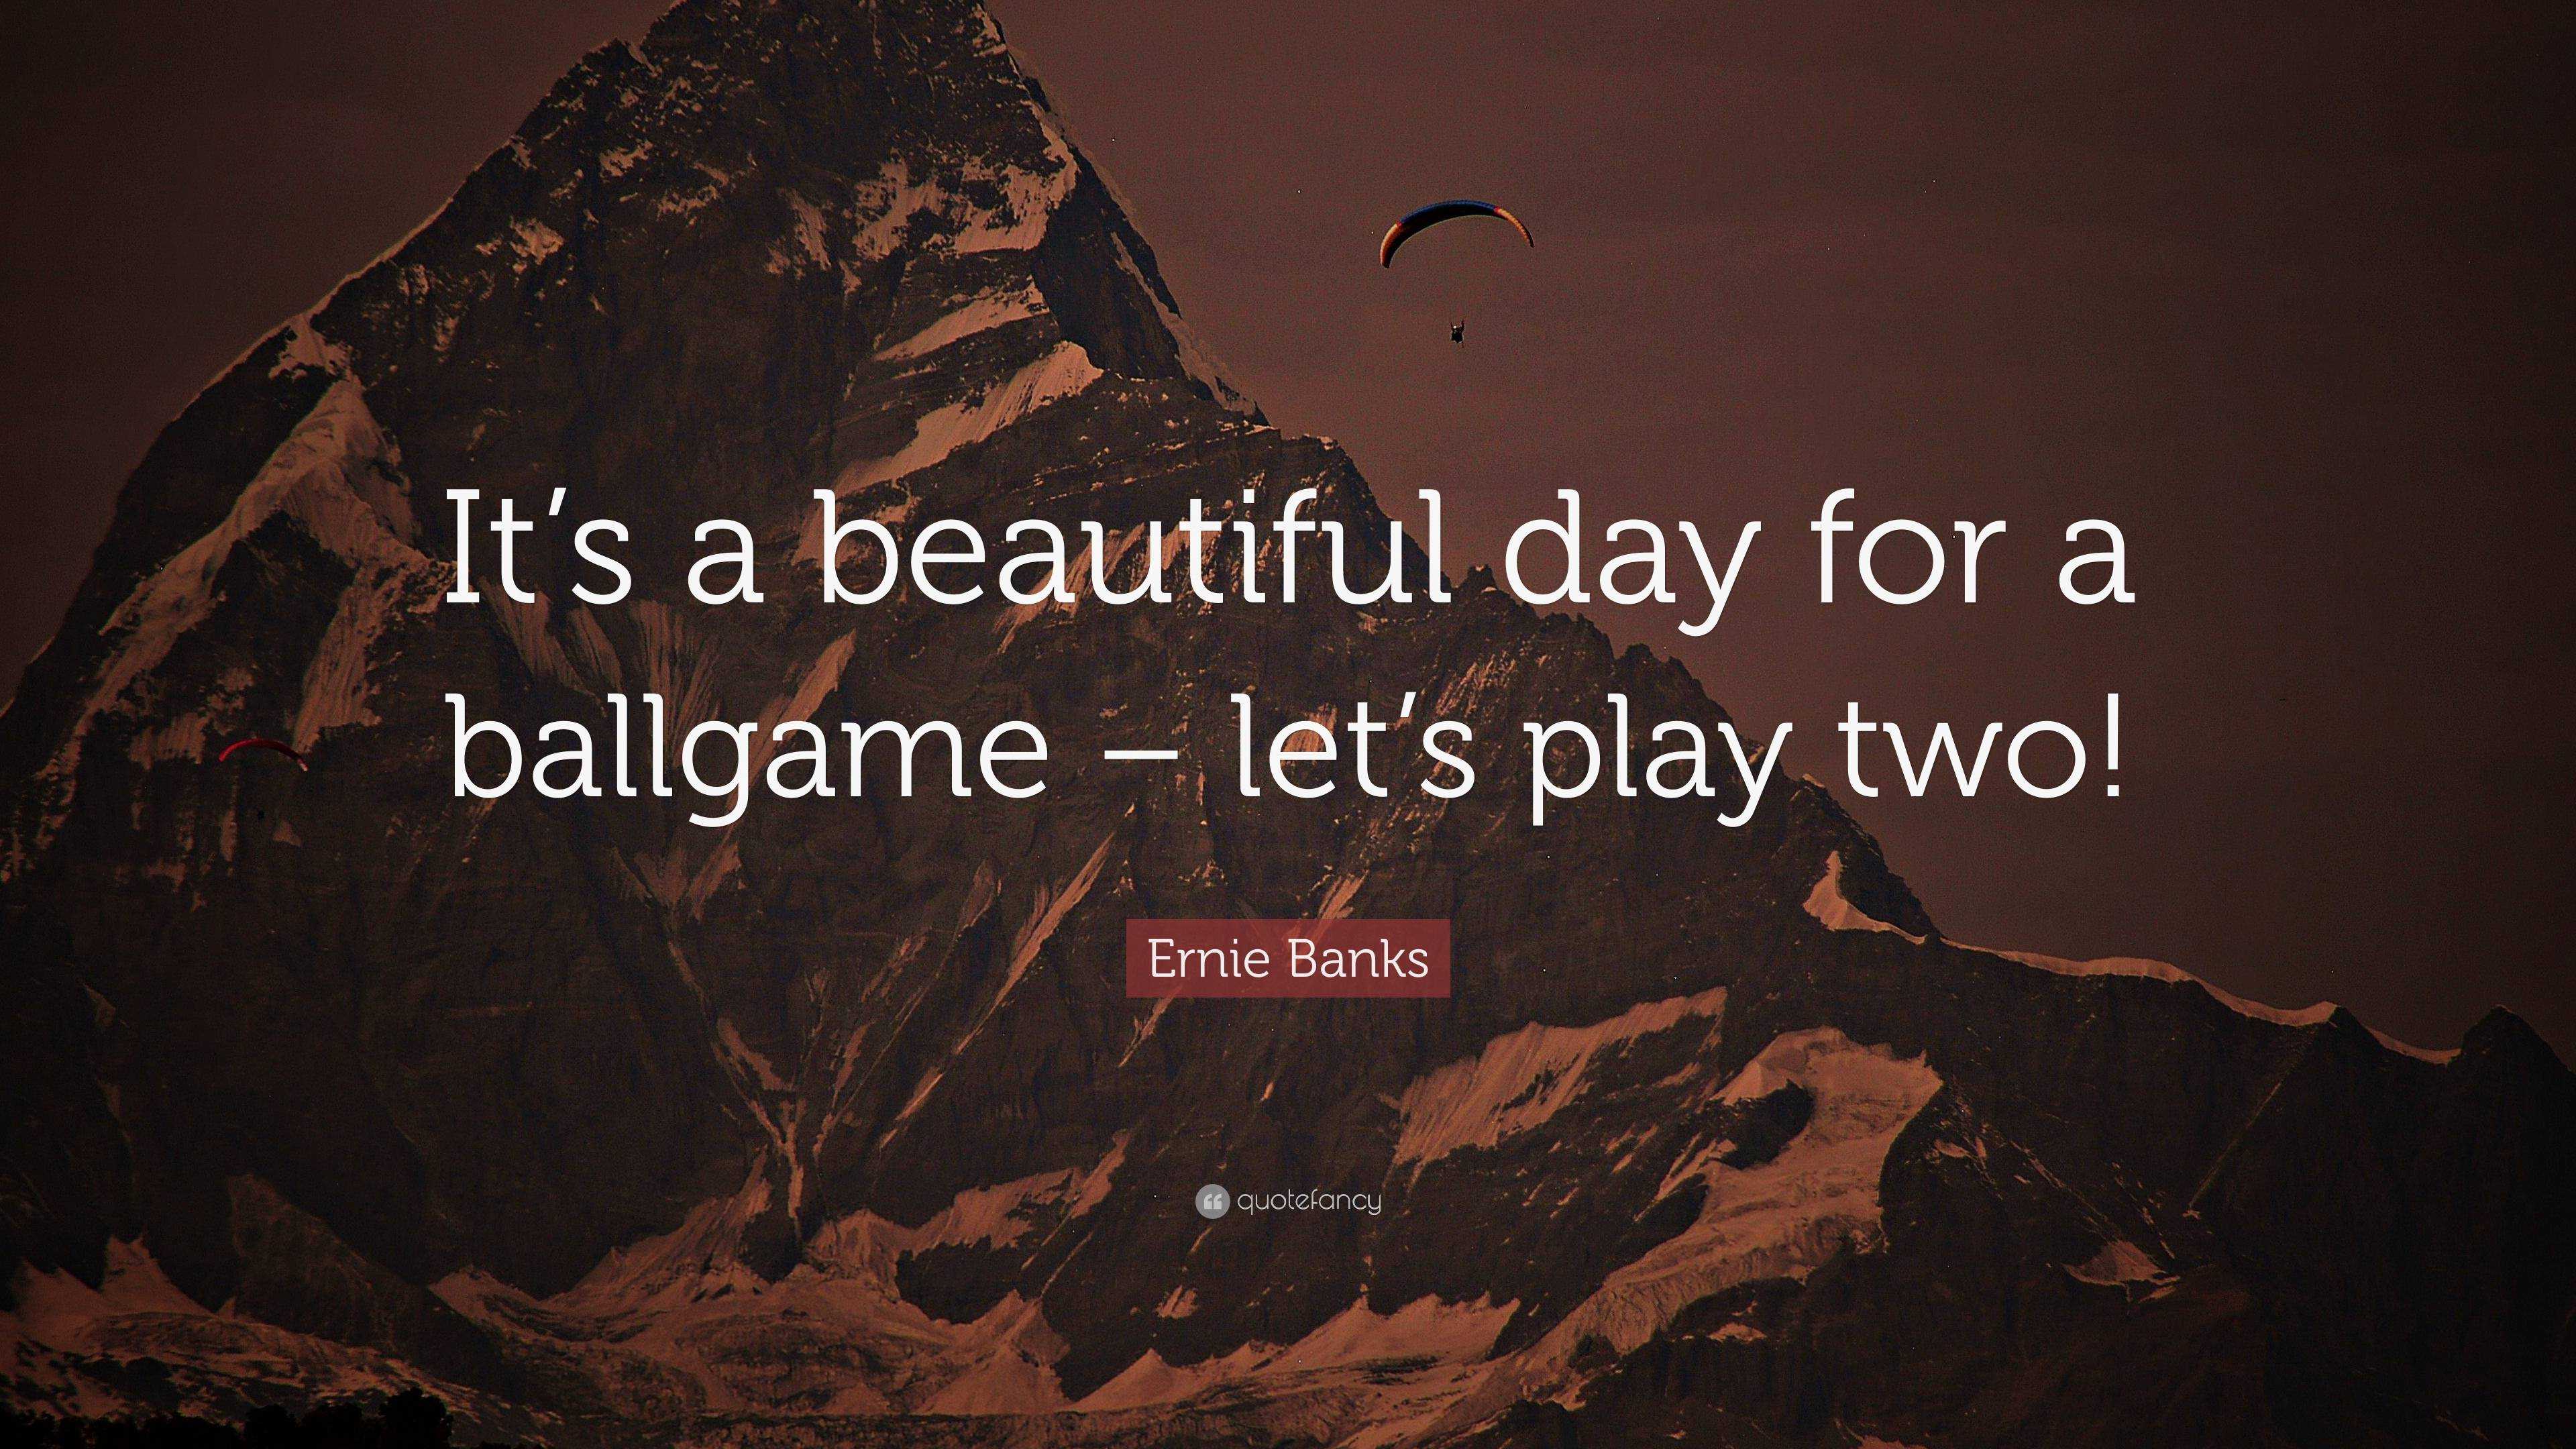 Ernie Banks Quote: “It's a great day for a ball game; let's play two!”